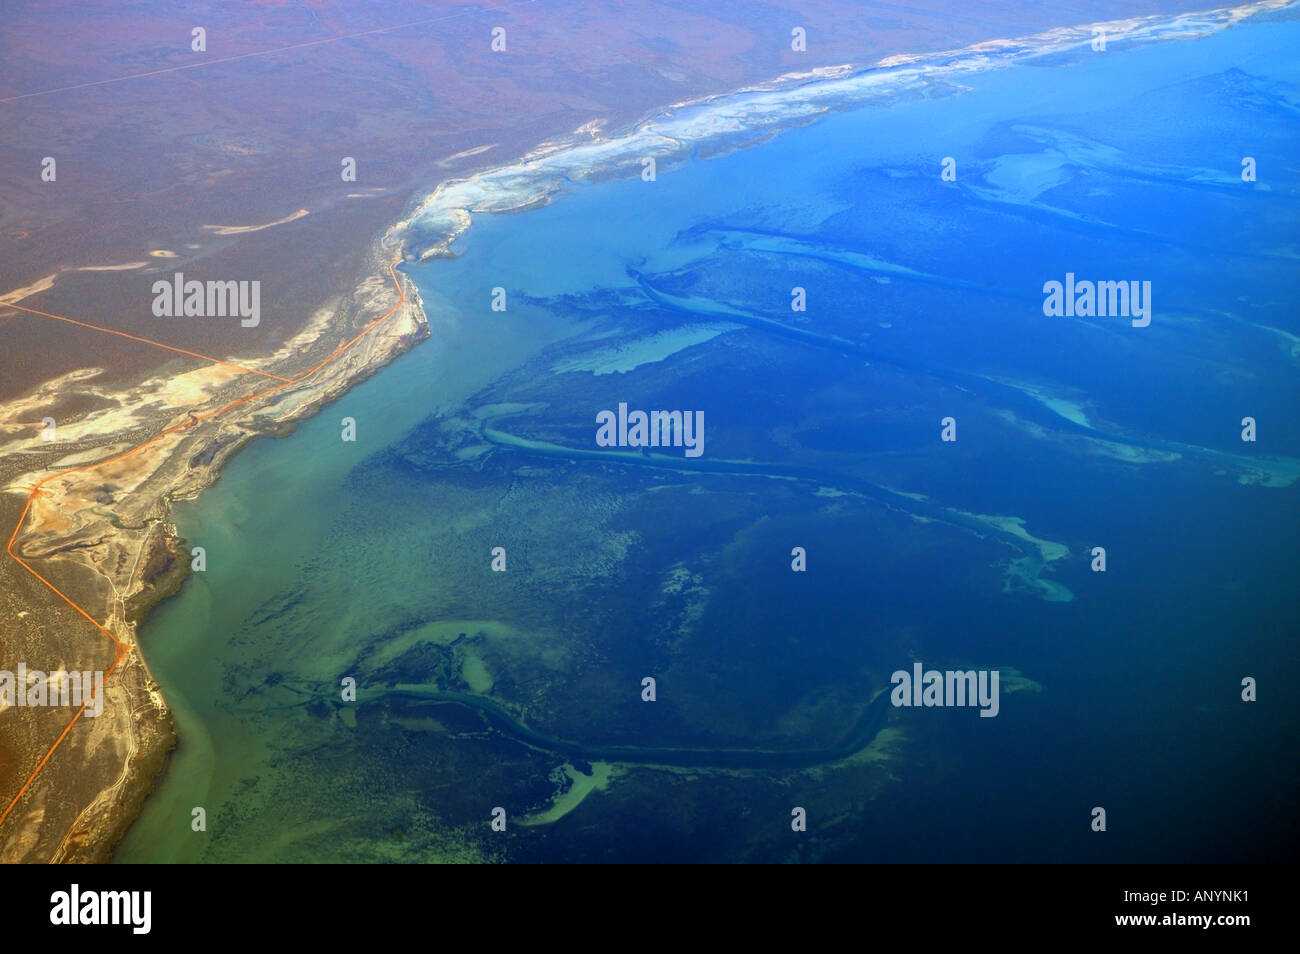 Shark Bay Marine Park and World Heritage Area aerial view showing channels through seagrass beds and arid red landscape Stock Photo